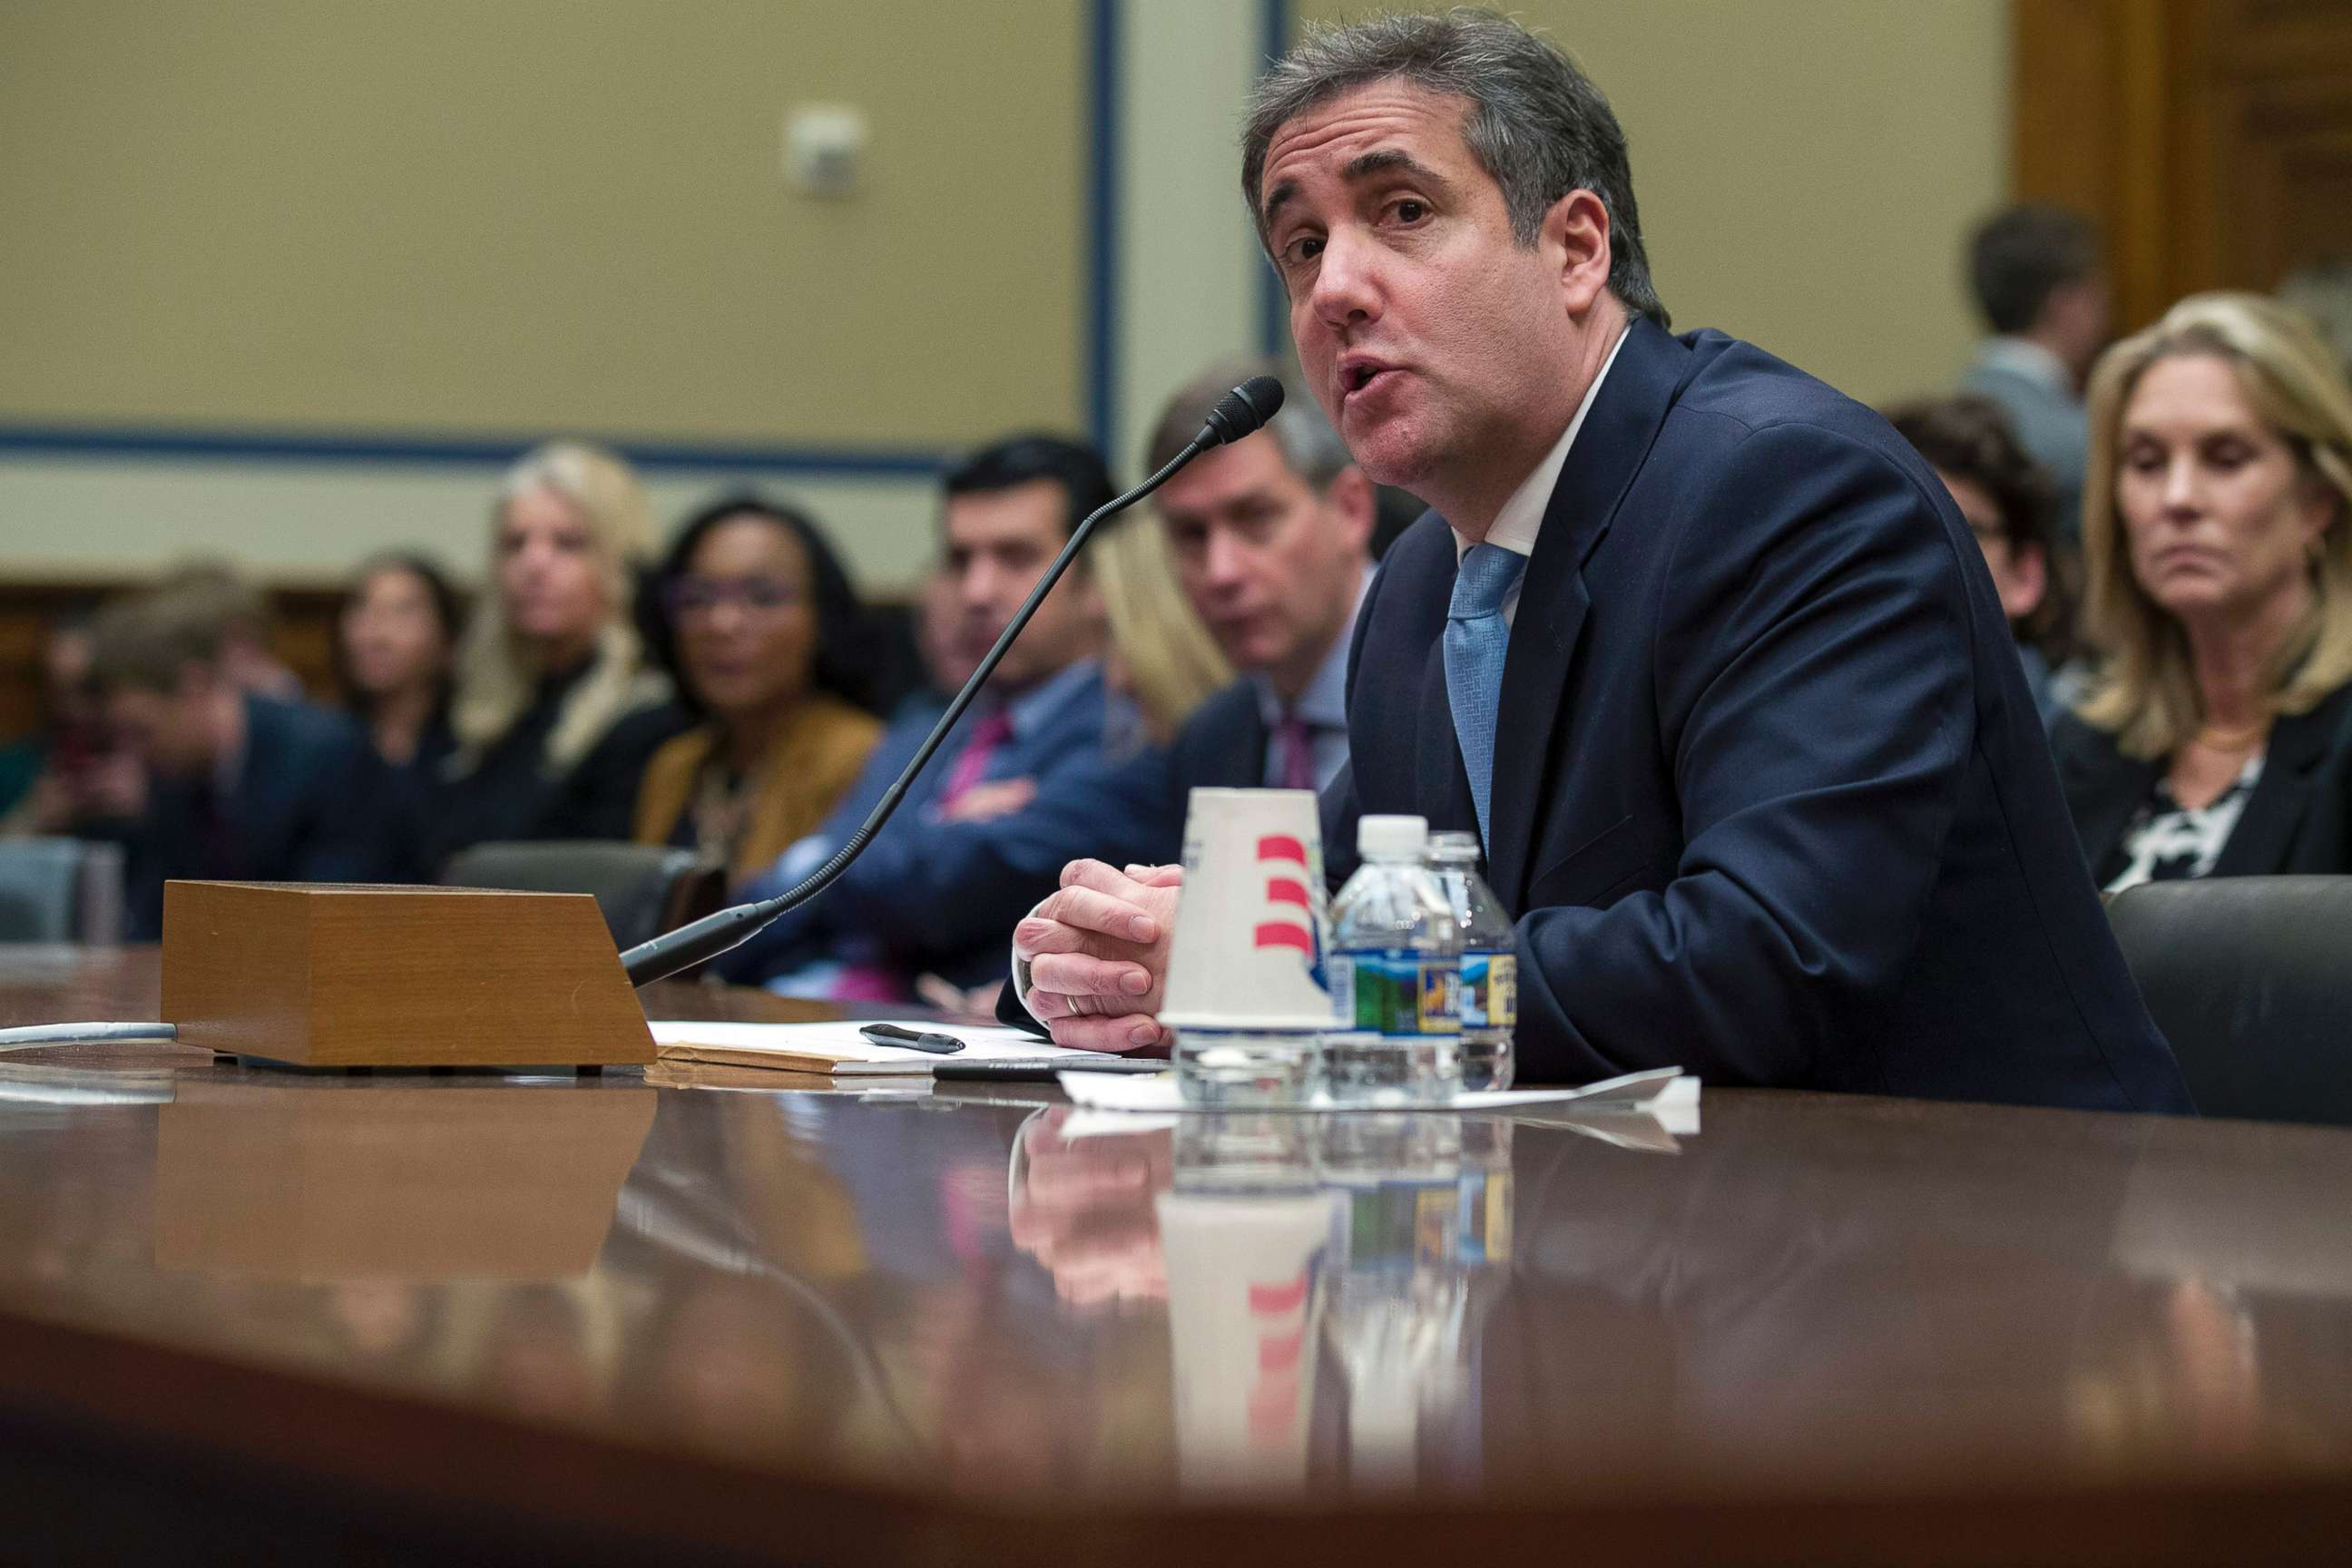 PHOTO: Michael Cohen, President Donald Trump's former lawyer, testifies before the House Oversight and Reform Committee, on Capitol Hill, Feb. 27, 2019, in Washington, D.C.